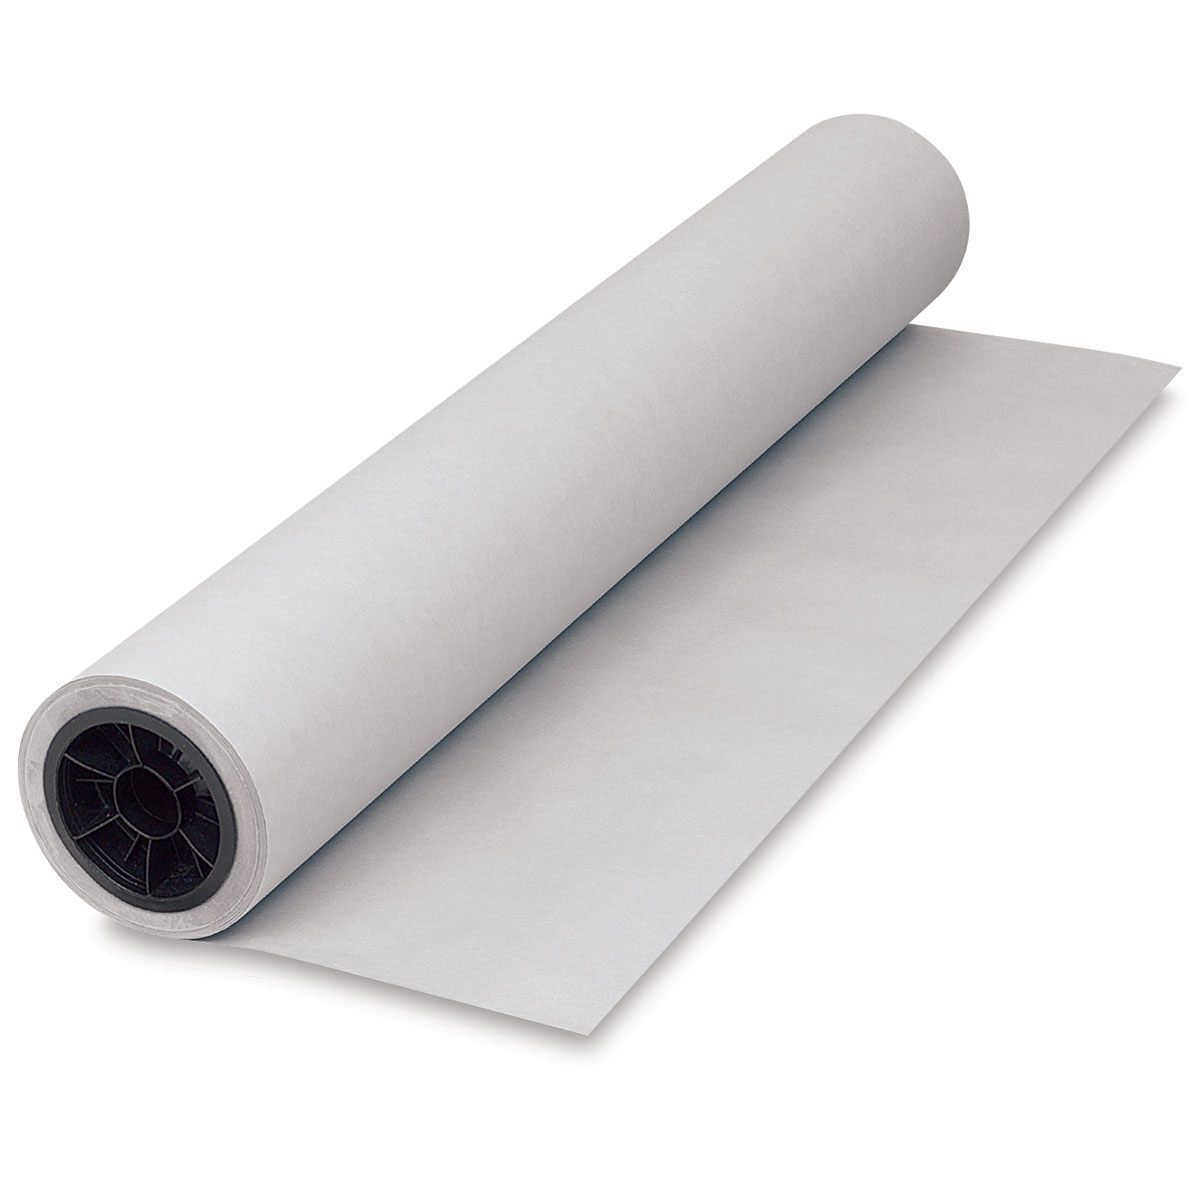 Acid-Free with a Neutral PH | Protects Art & Photographs | Glassine Paper  Roll | 24 inches x 300 feet | by Paper Pros